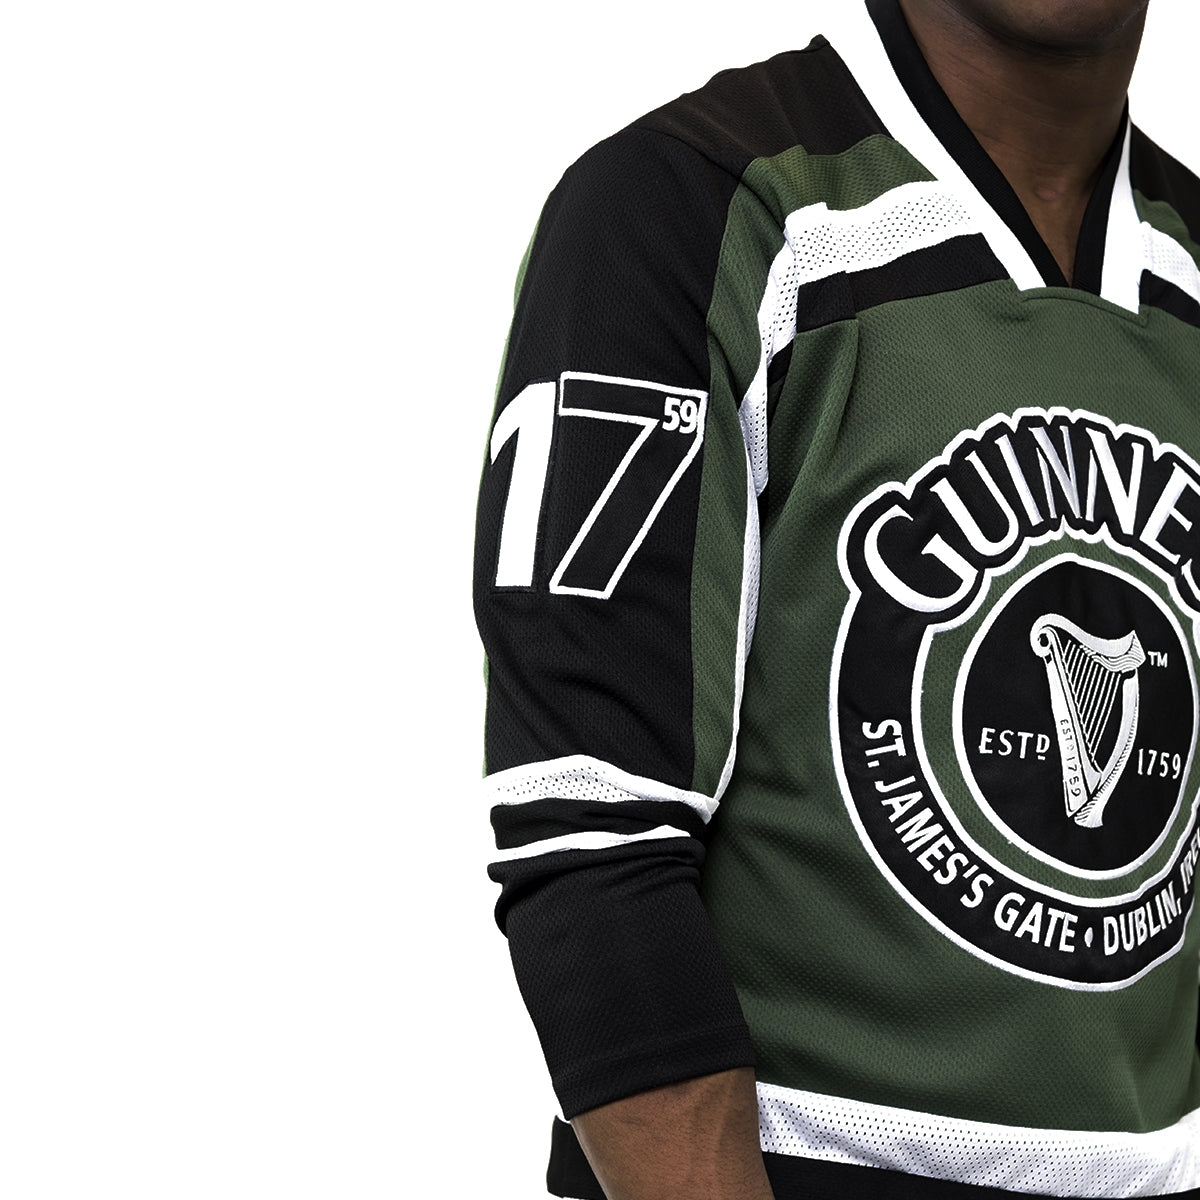 Arthur Guinness wearing a Green & White hockey jersey with the Guinness harp logo.